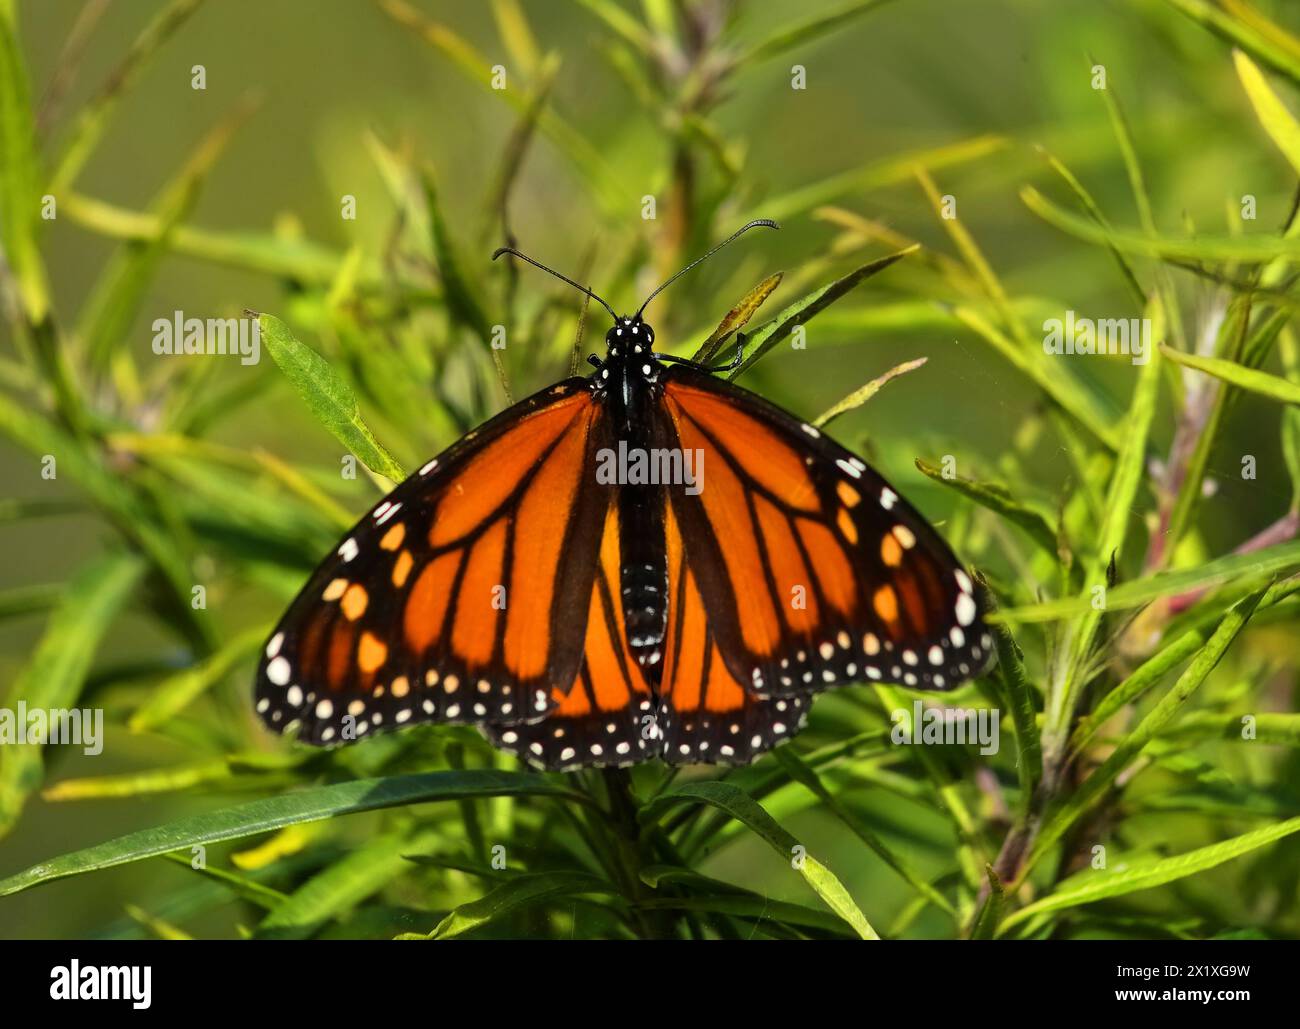 A Monarch butterfly - Danaus plexippus on a balloon plant, one of its favorite habitats. Rare sighting in Oeiras, Portugal. Nymphalidae family. Stock Photo